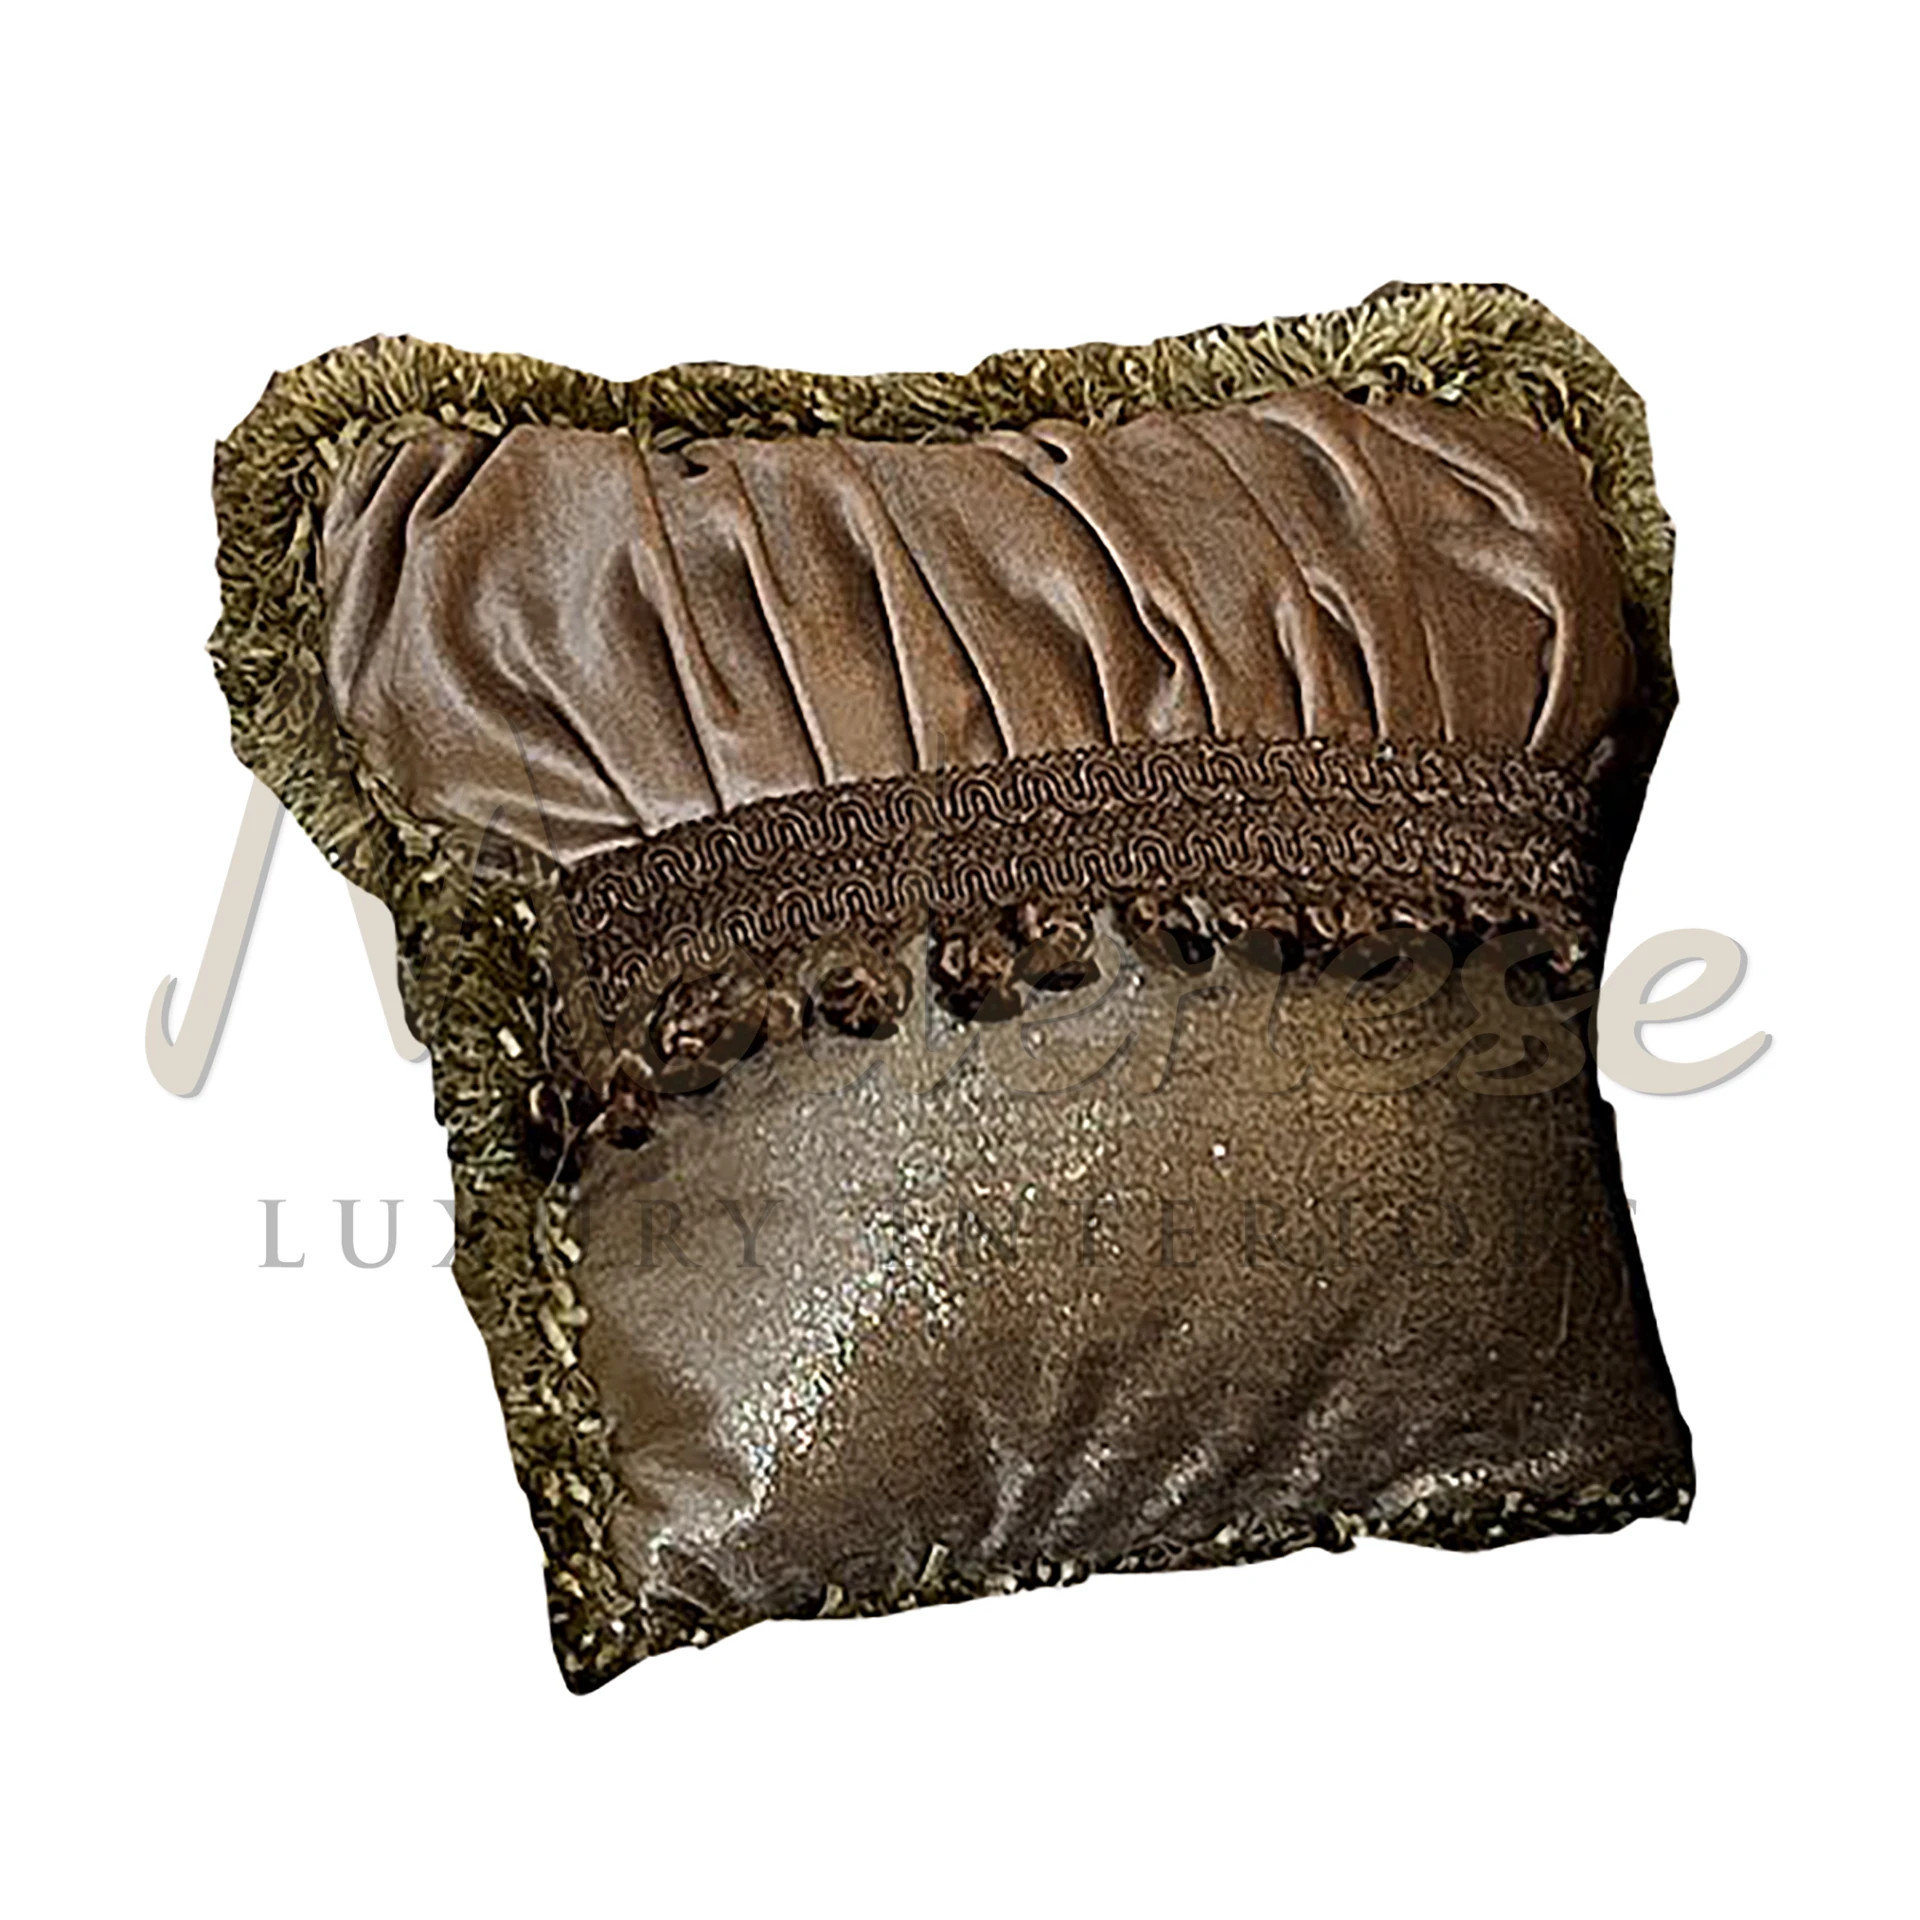 Baroque Designer Pillow, a masterpiece of luxury and elegance, with intricate detailing and opulent design from Italy.